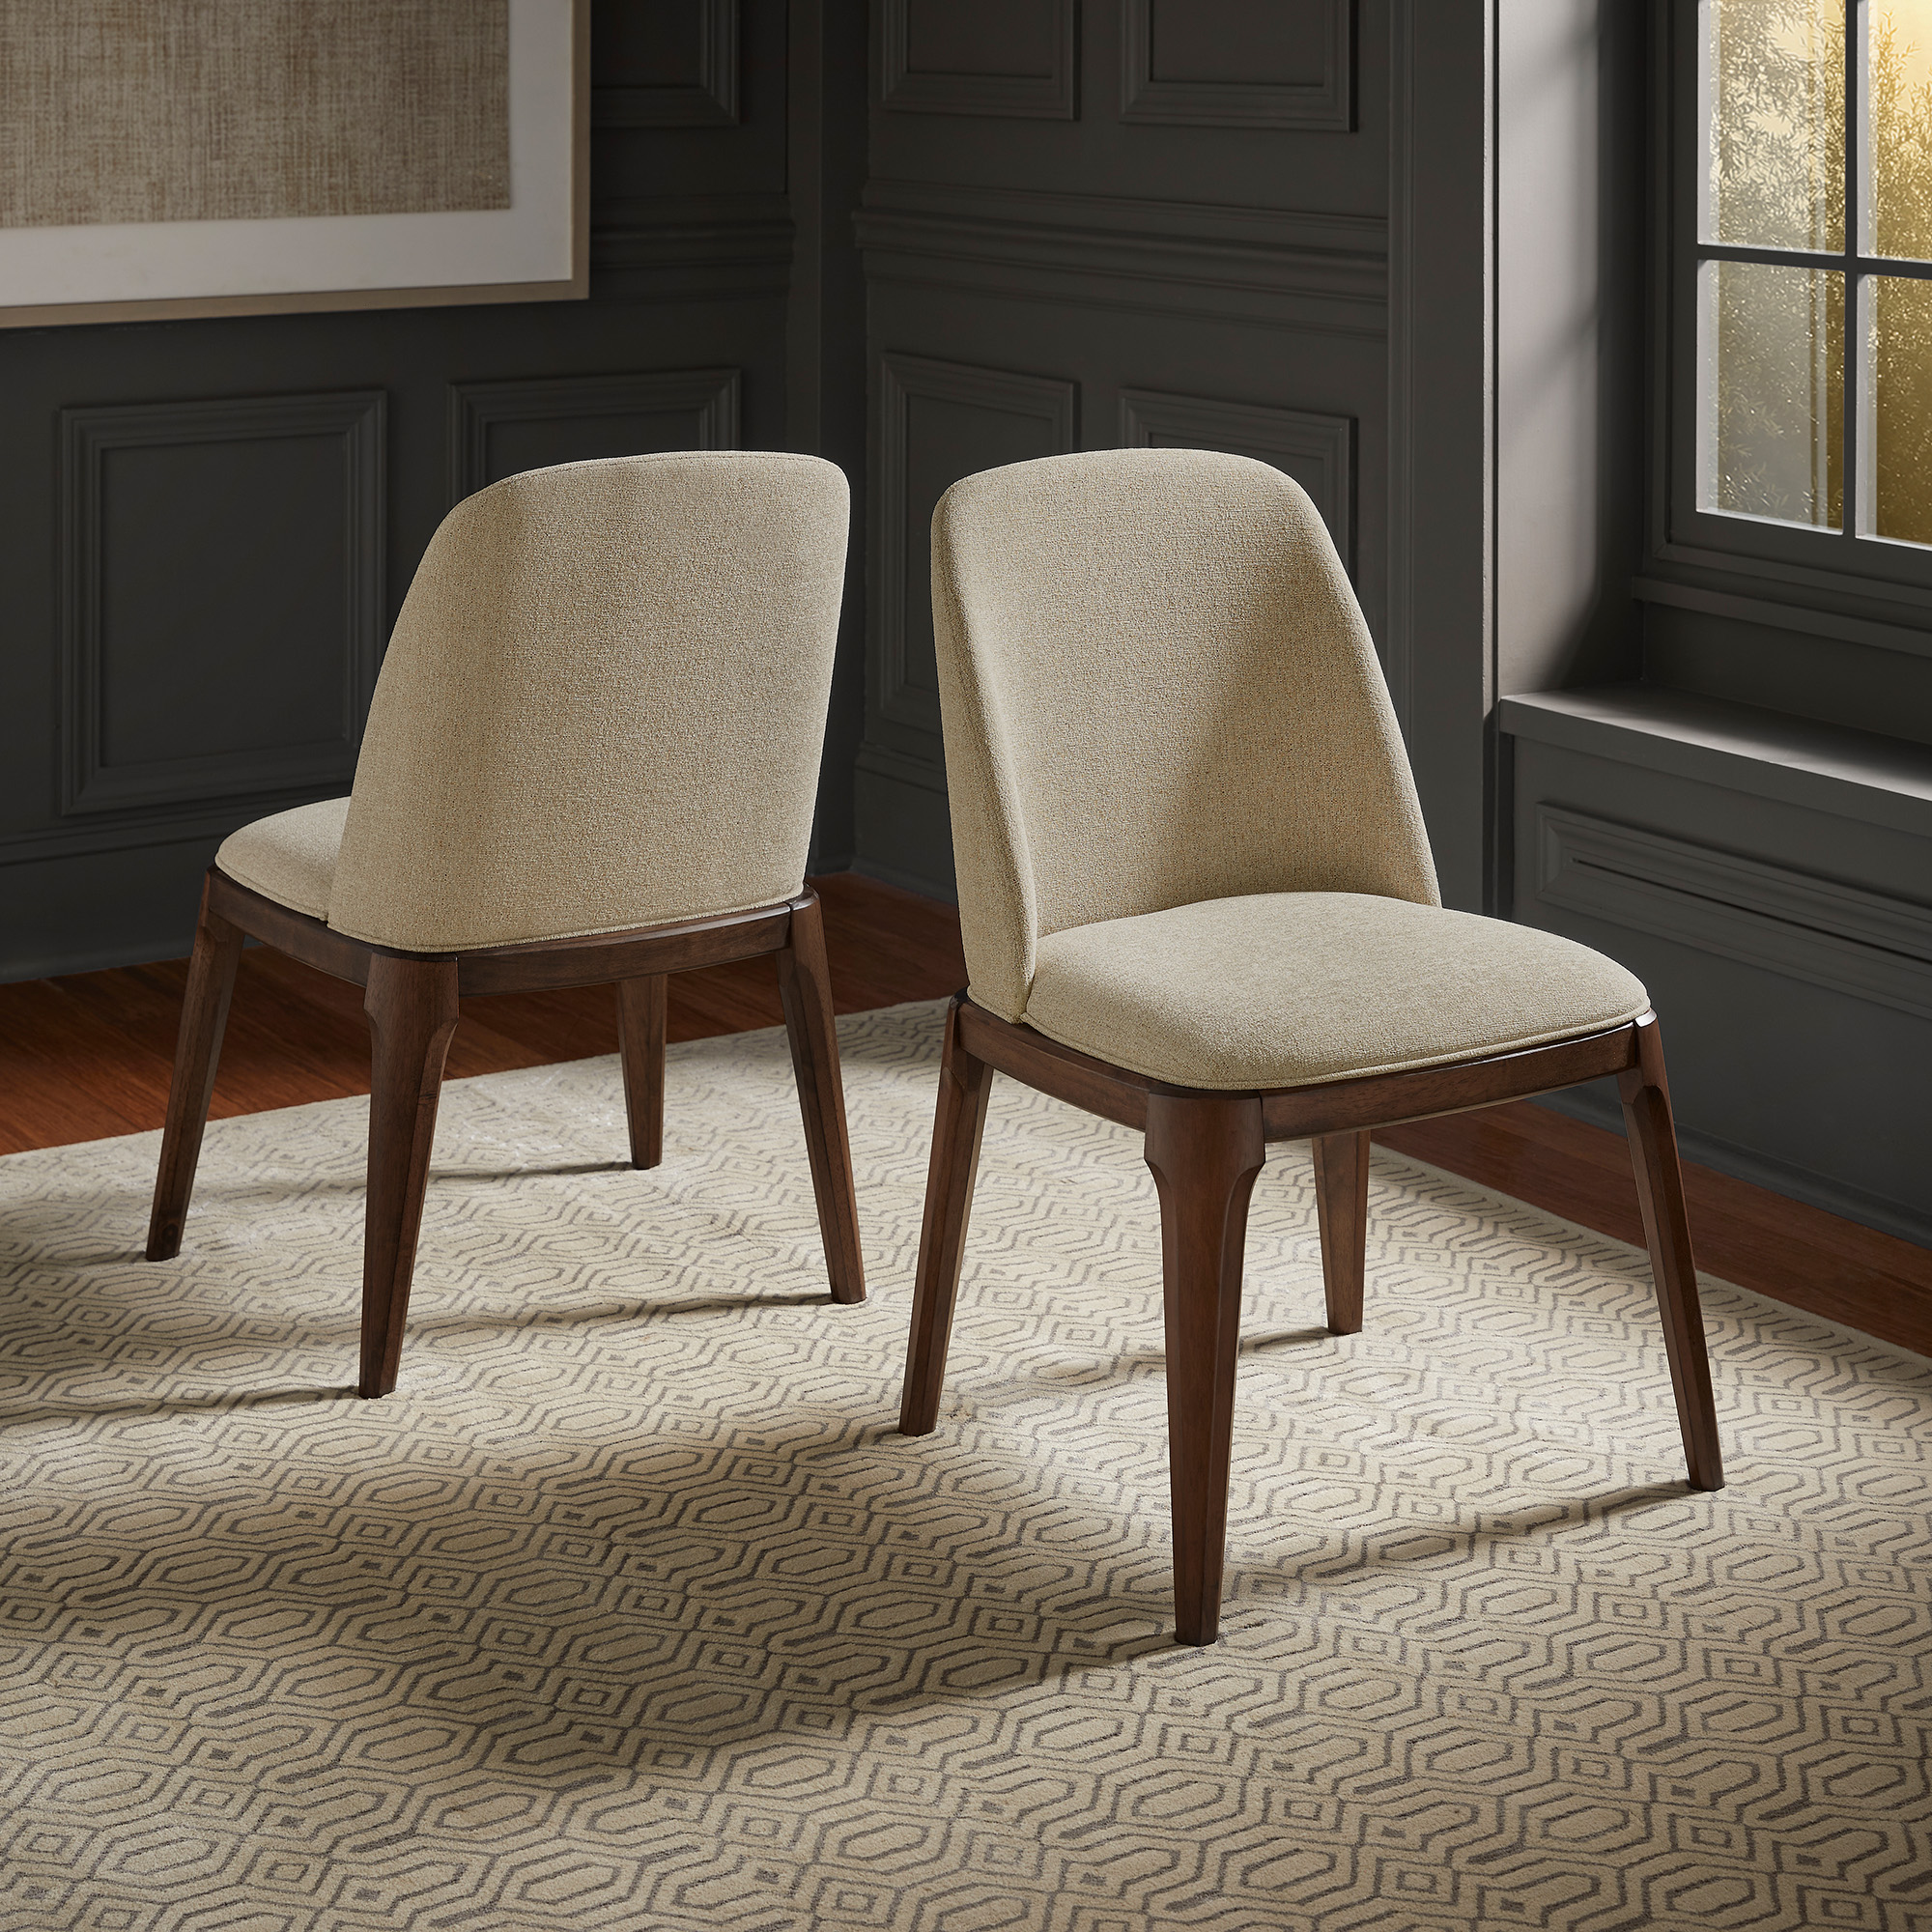 Upholstered Side Chairs with Walnut Legs (Set of 2)